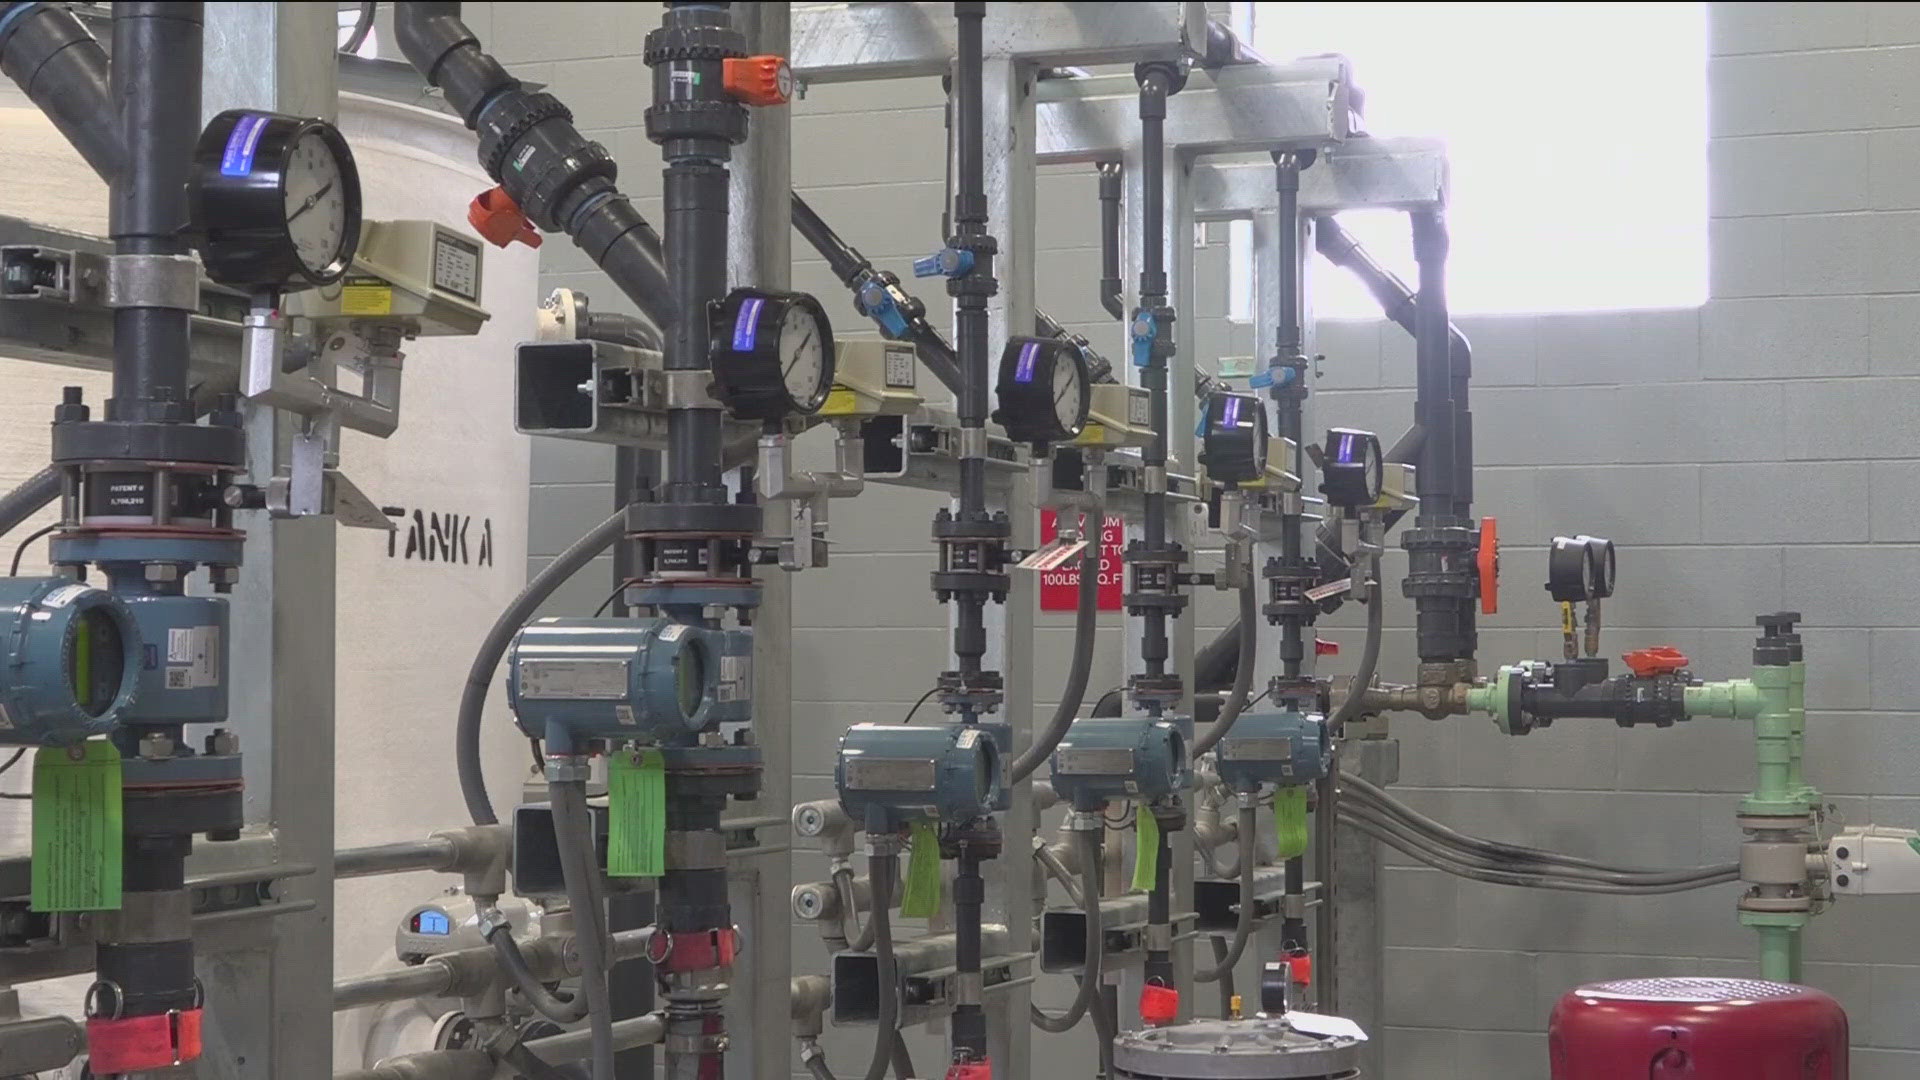 More than $500 million of investments were made to the plant after the 2014 water crisis, including service pumps, cyanobacteria sensors and more.